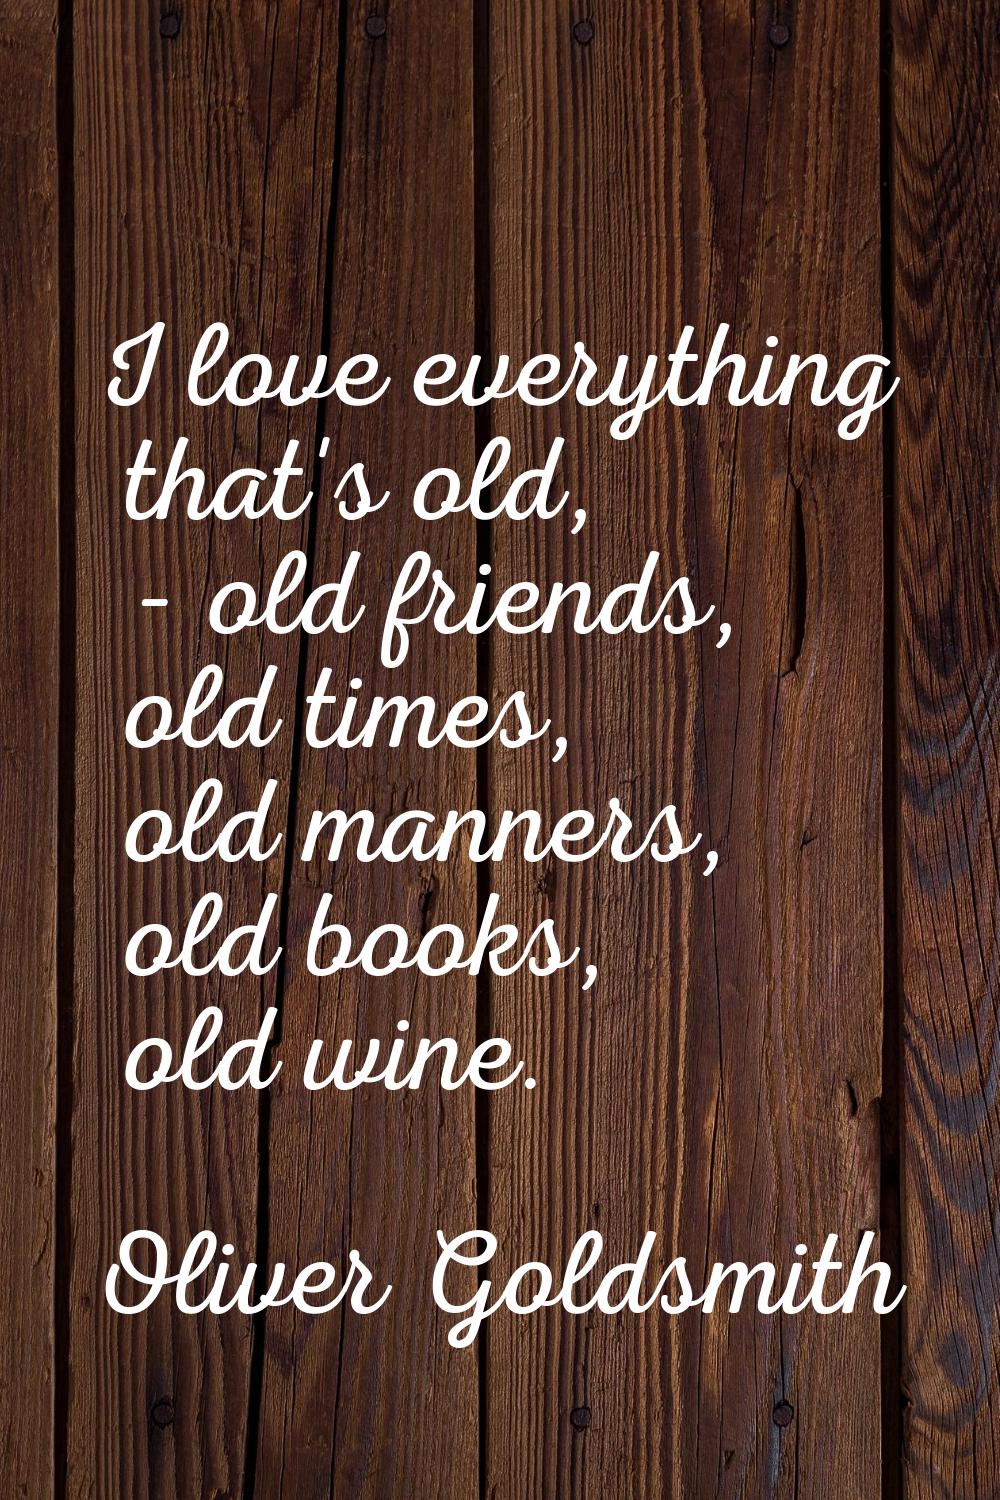 I love everything that's old, - old friends, old times, old manners, old books, old wine.